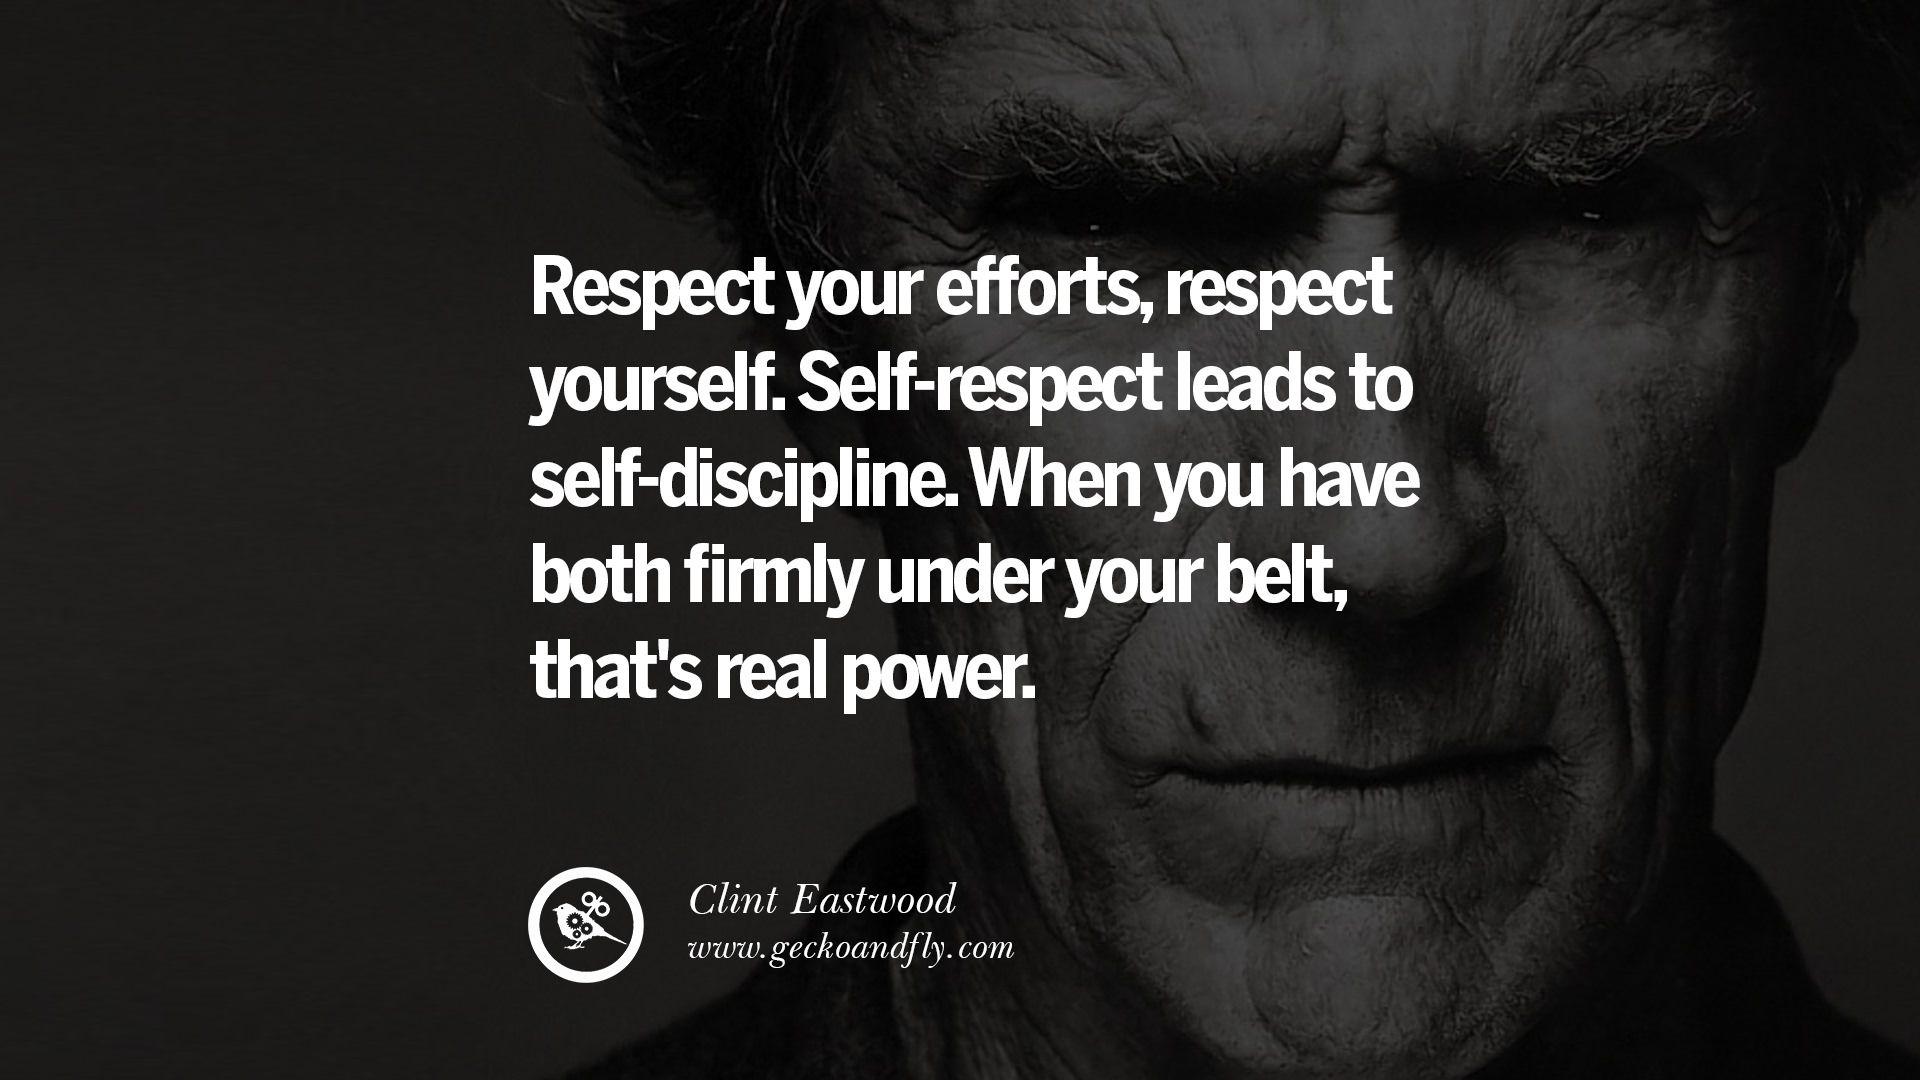 Inspiring Clint Eastwood Quotes On Politics, Life And Work